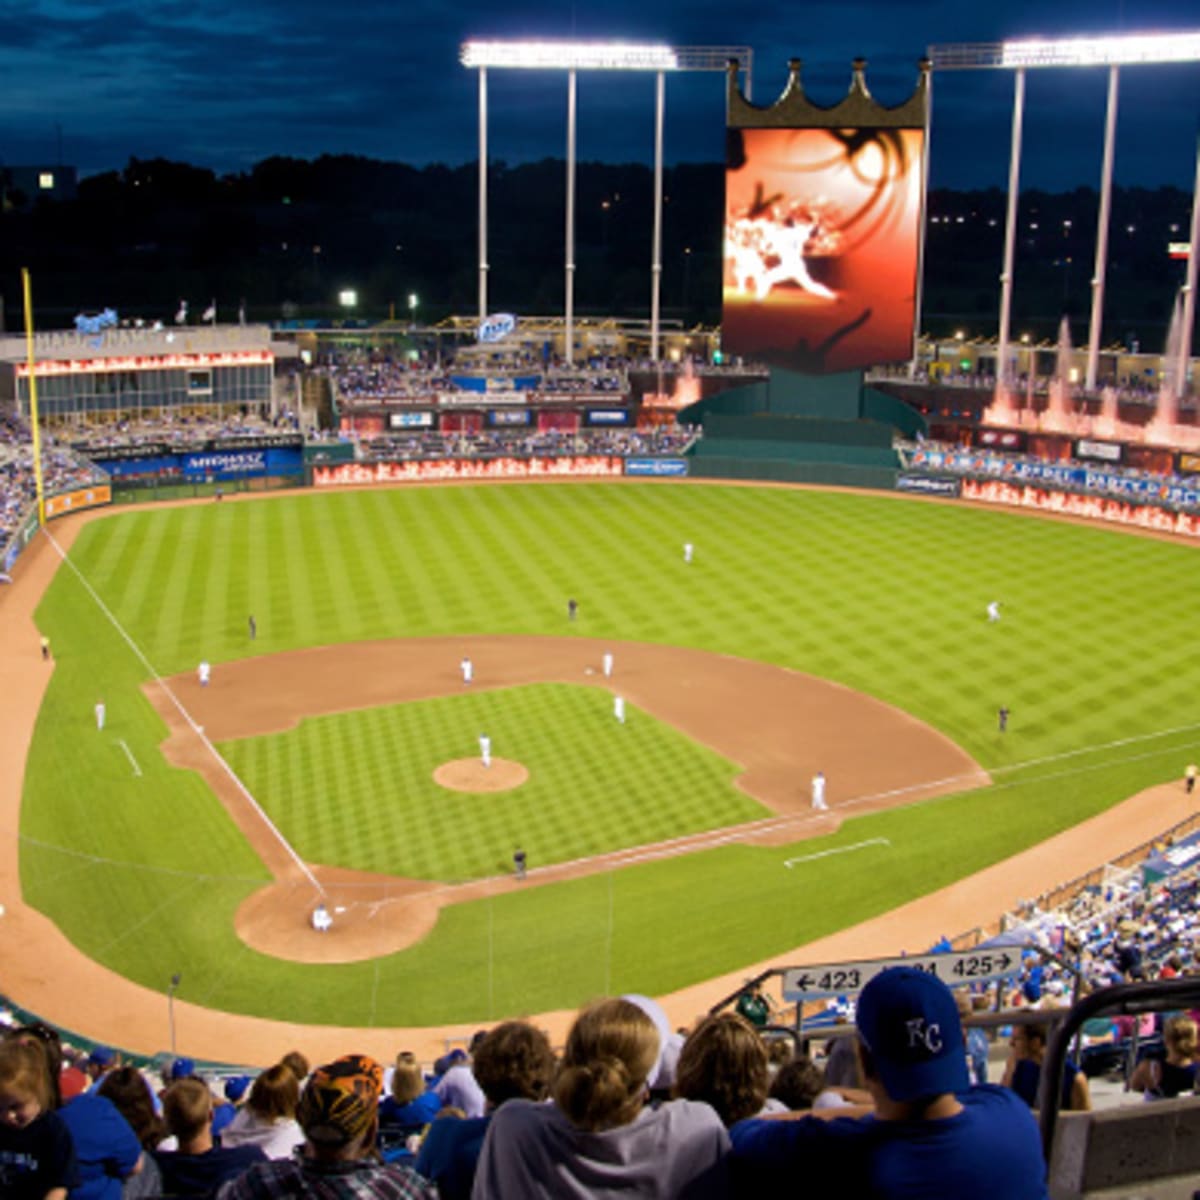 Royals considering several sites for new stadium, owner says